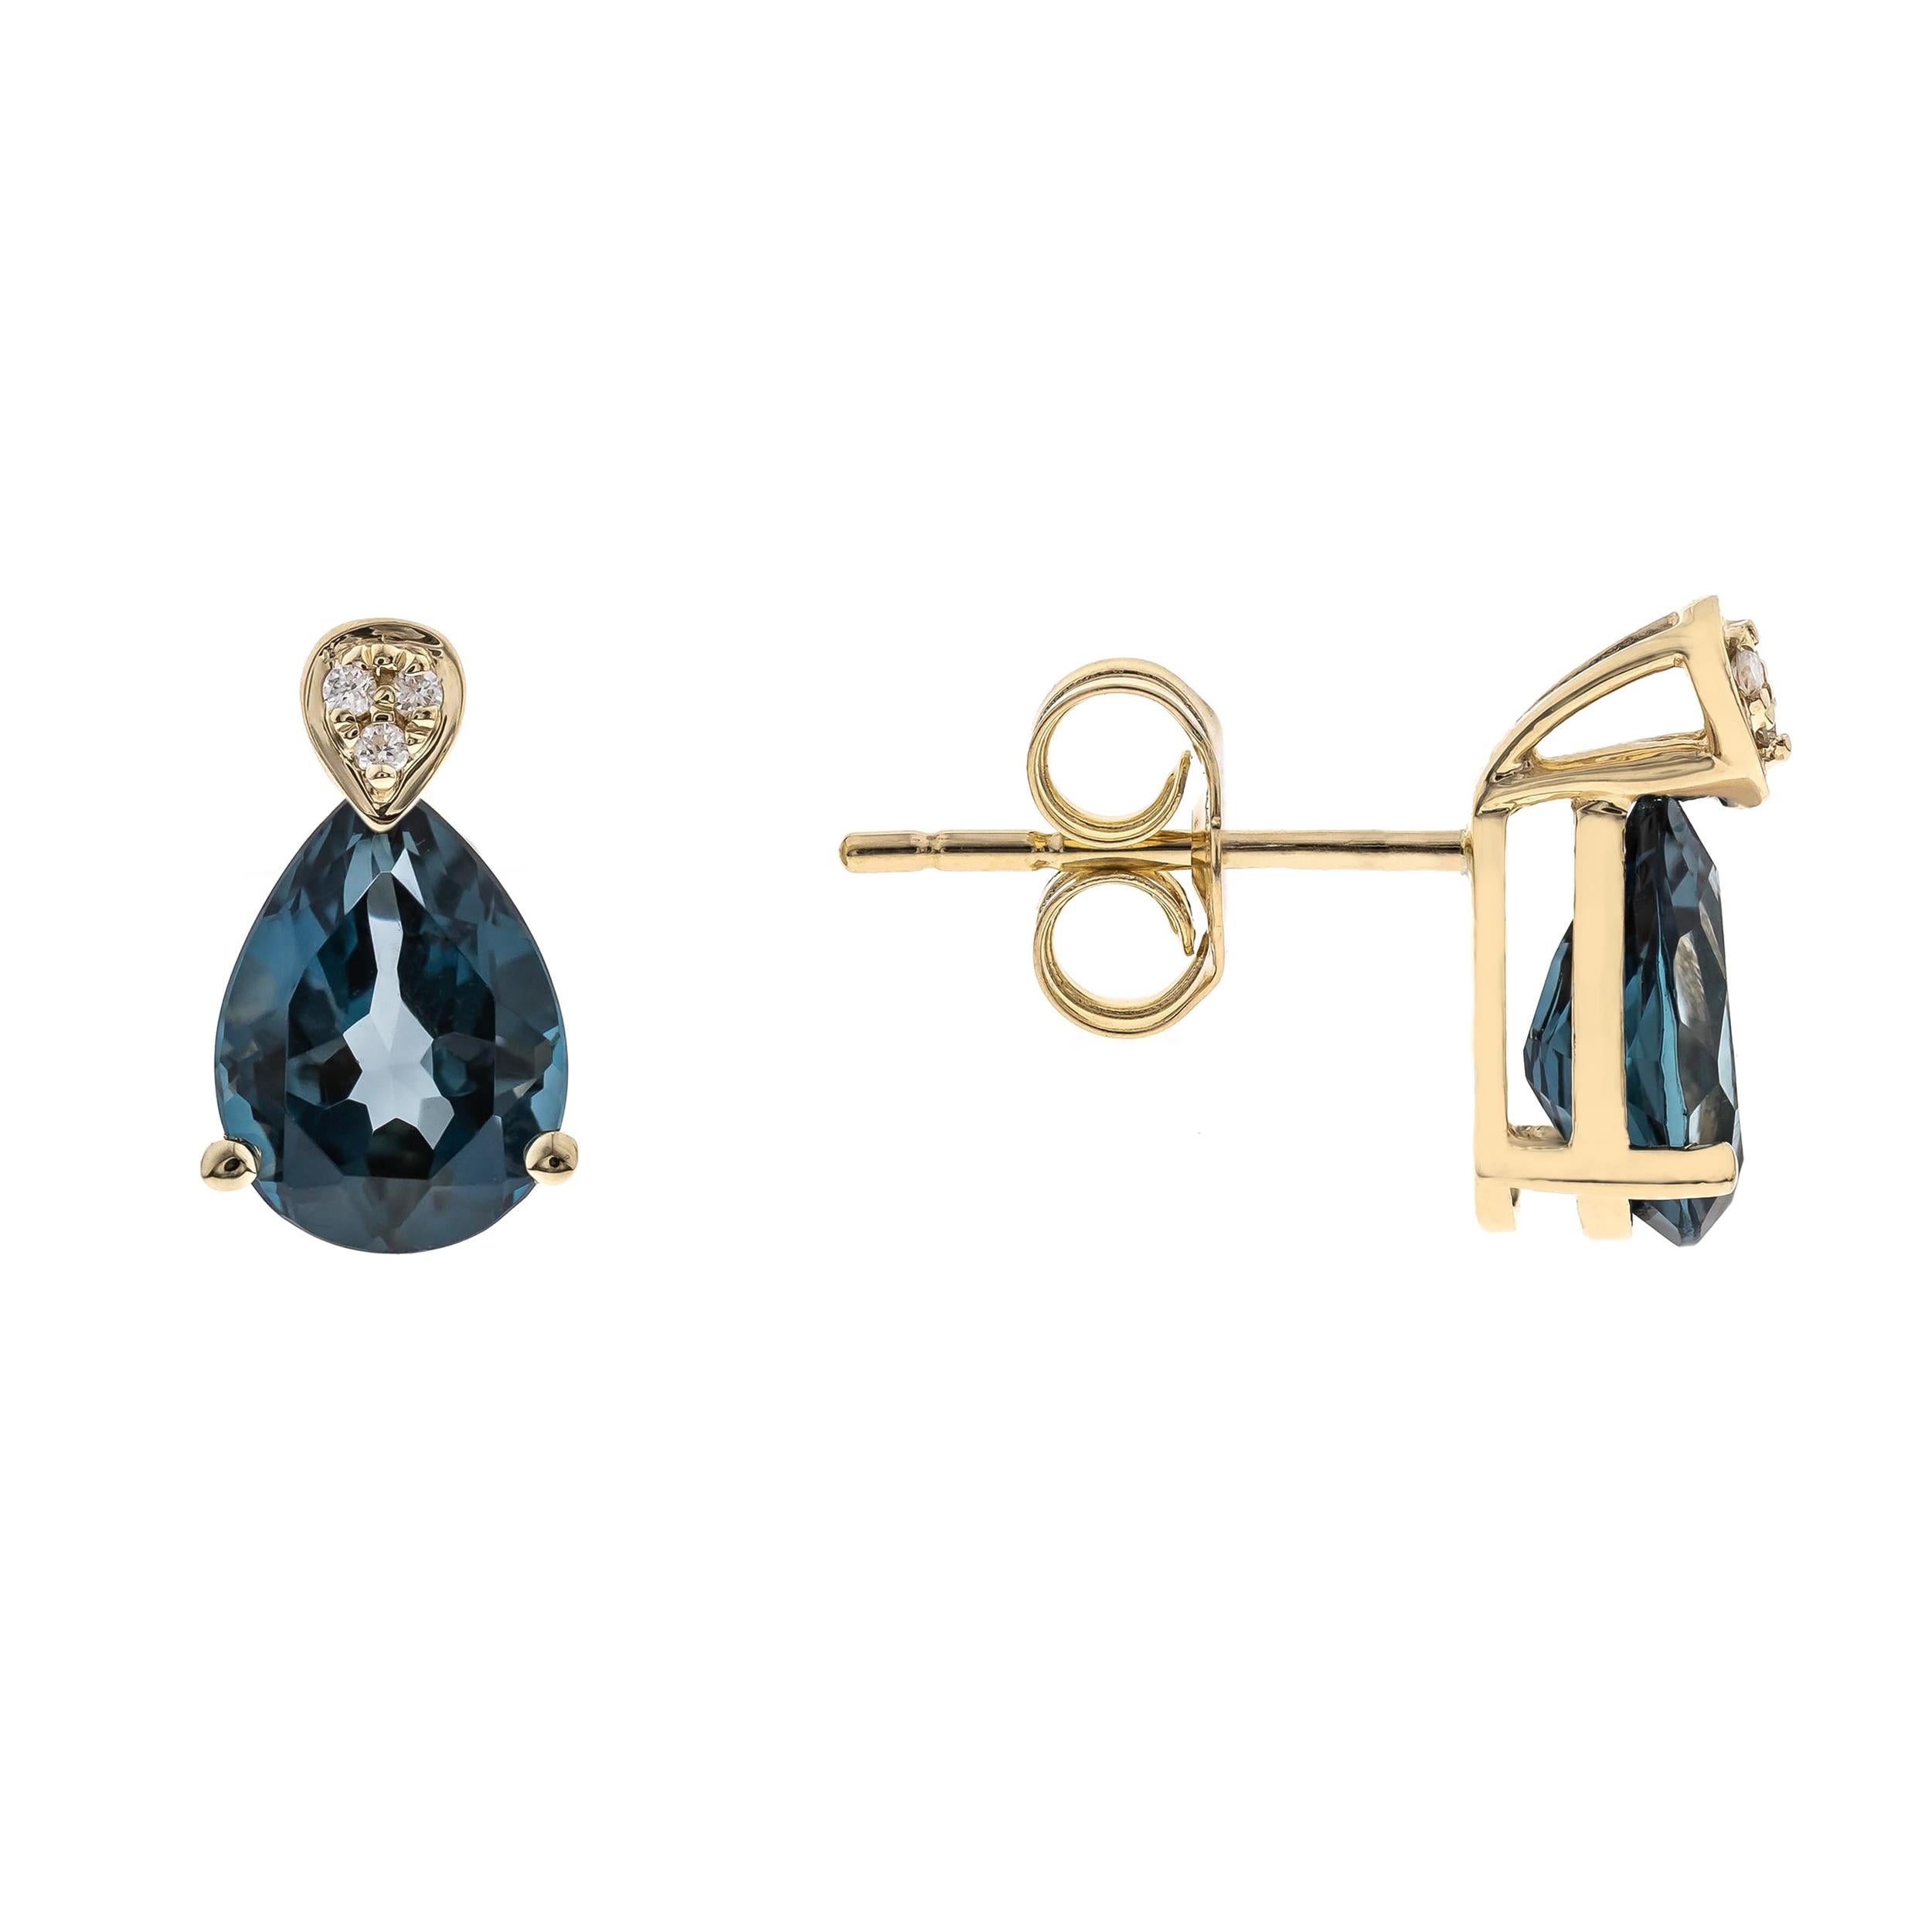 Decorate yourself in elegance with this Earring is crafted from 10-karat Yellow Gold by Gin & Grace Earring. This Earring is made up of 8x6 mm Pear-cut (2 pcs) 2.79 carat London Blue Topaz and Round-cut White Diamond (6 pcs) 0.02 carat. This Earring